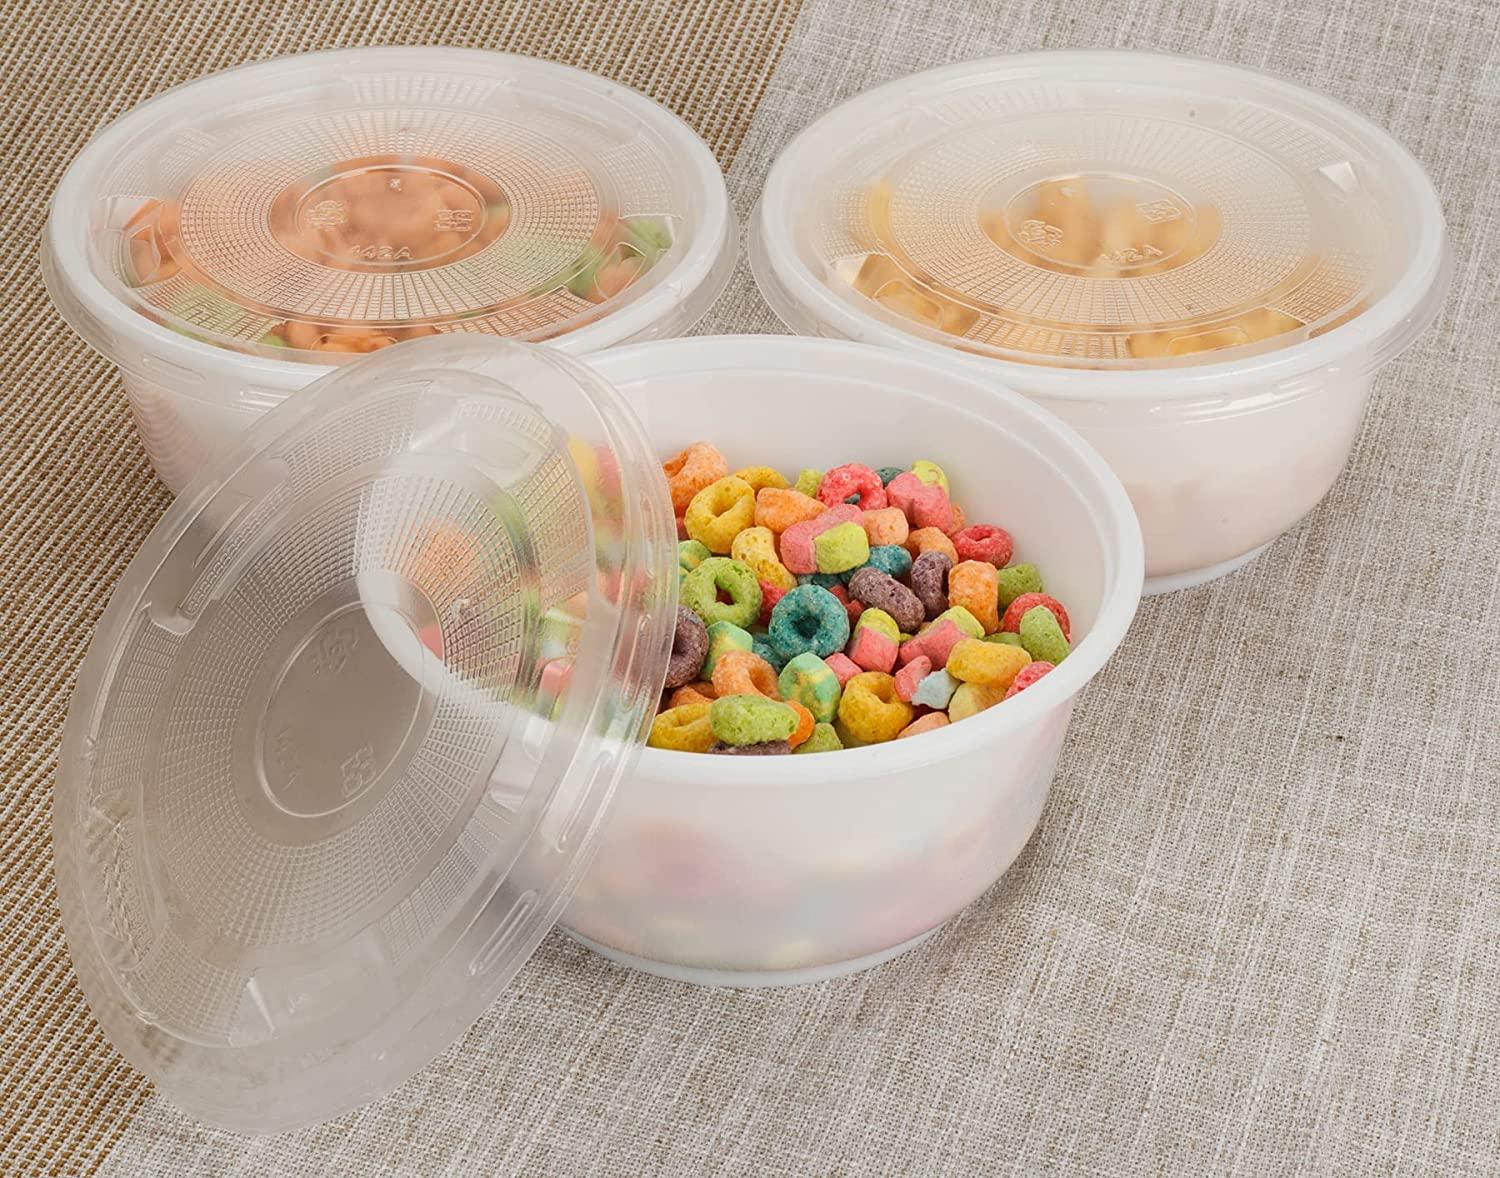 GOLDEN APPLE Meal prep containers 28oz-15sets 850ml - Reusable Plastic  Containers with Lids -BPA Free- Disposable Meal Prep Bowls - Microwavable,  Freezer and Dishwasher Safe - Lunch Containers 28 Ounce